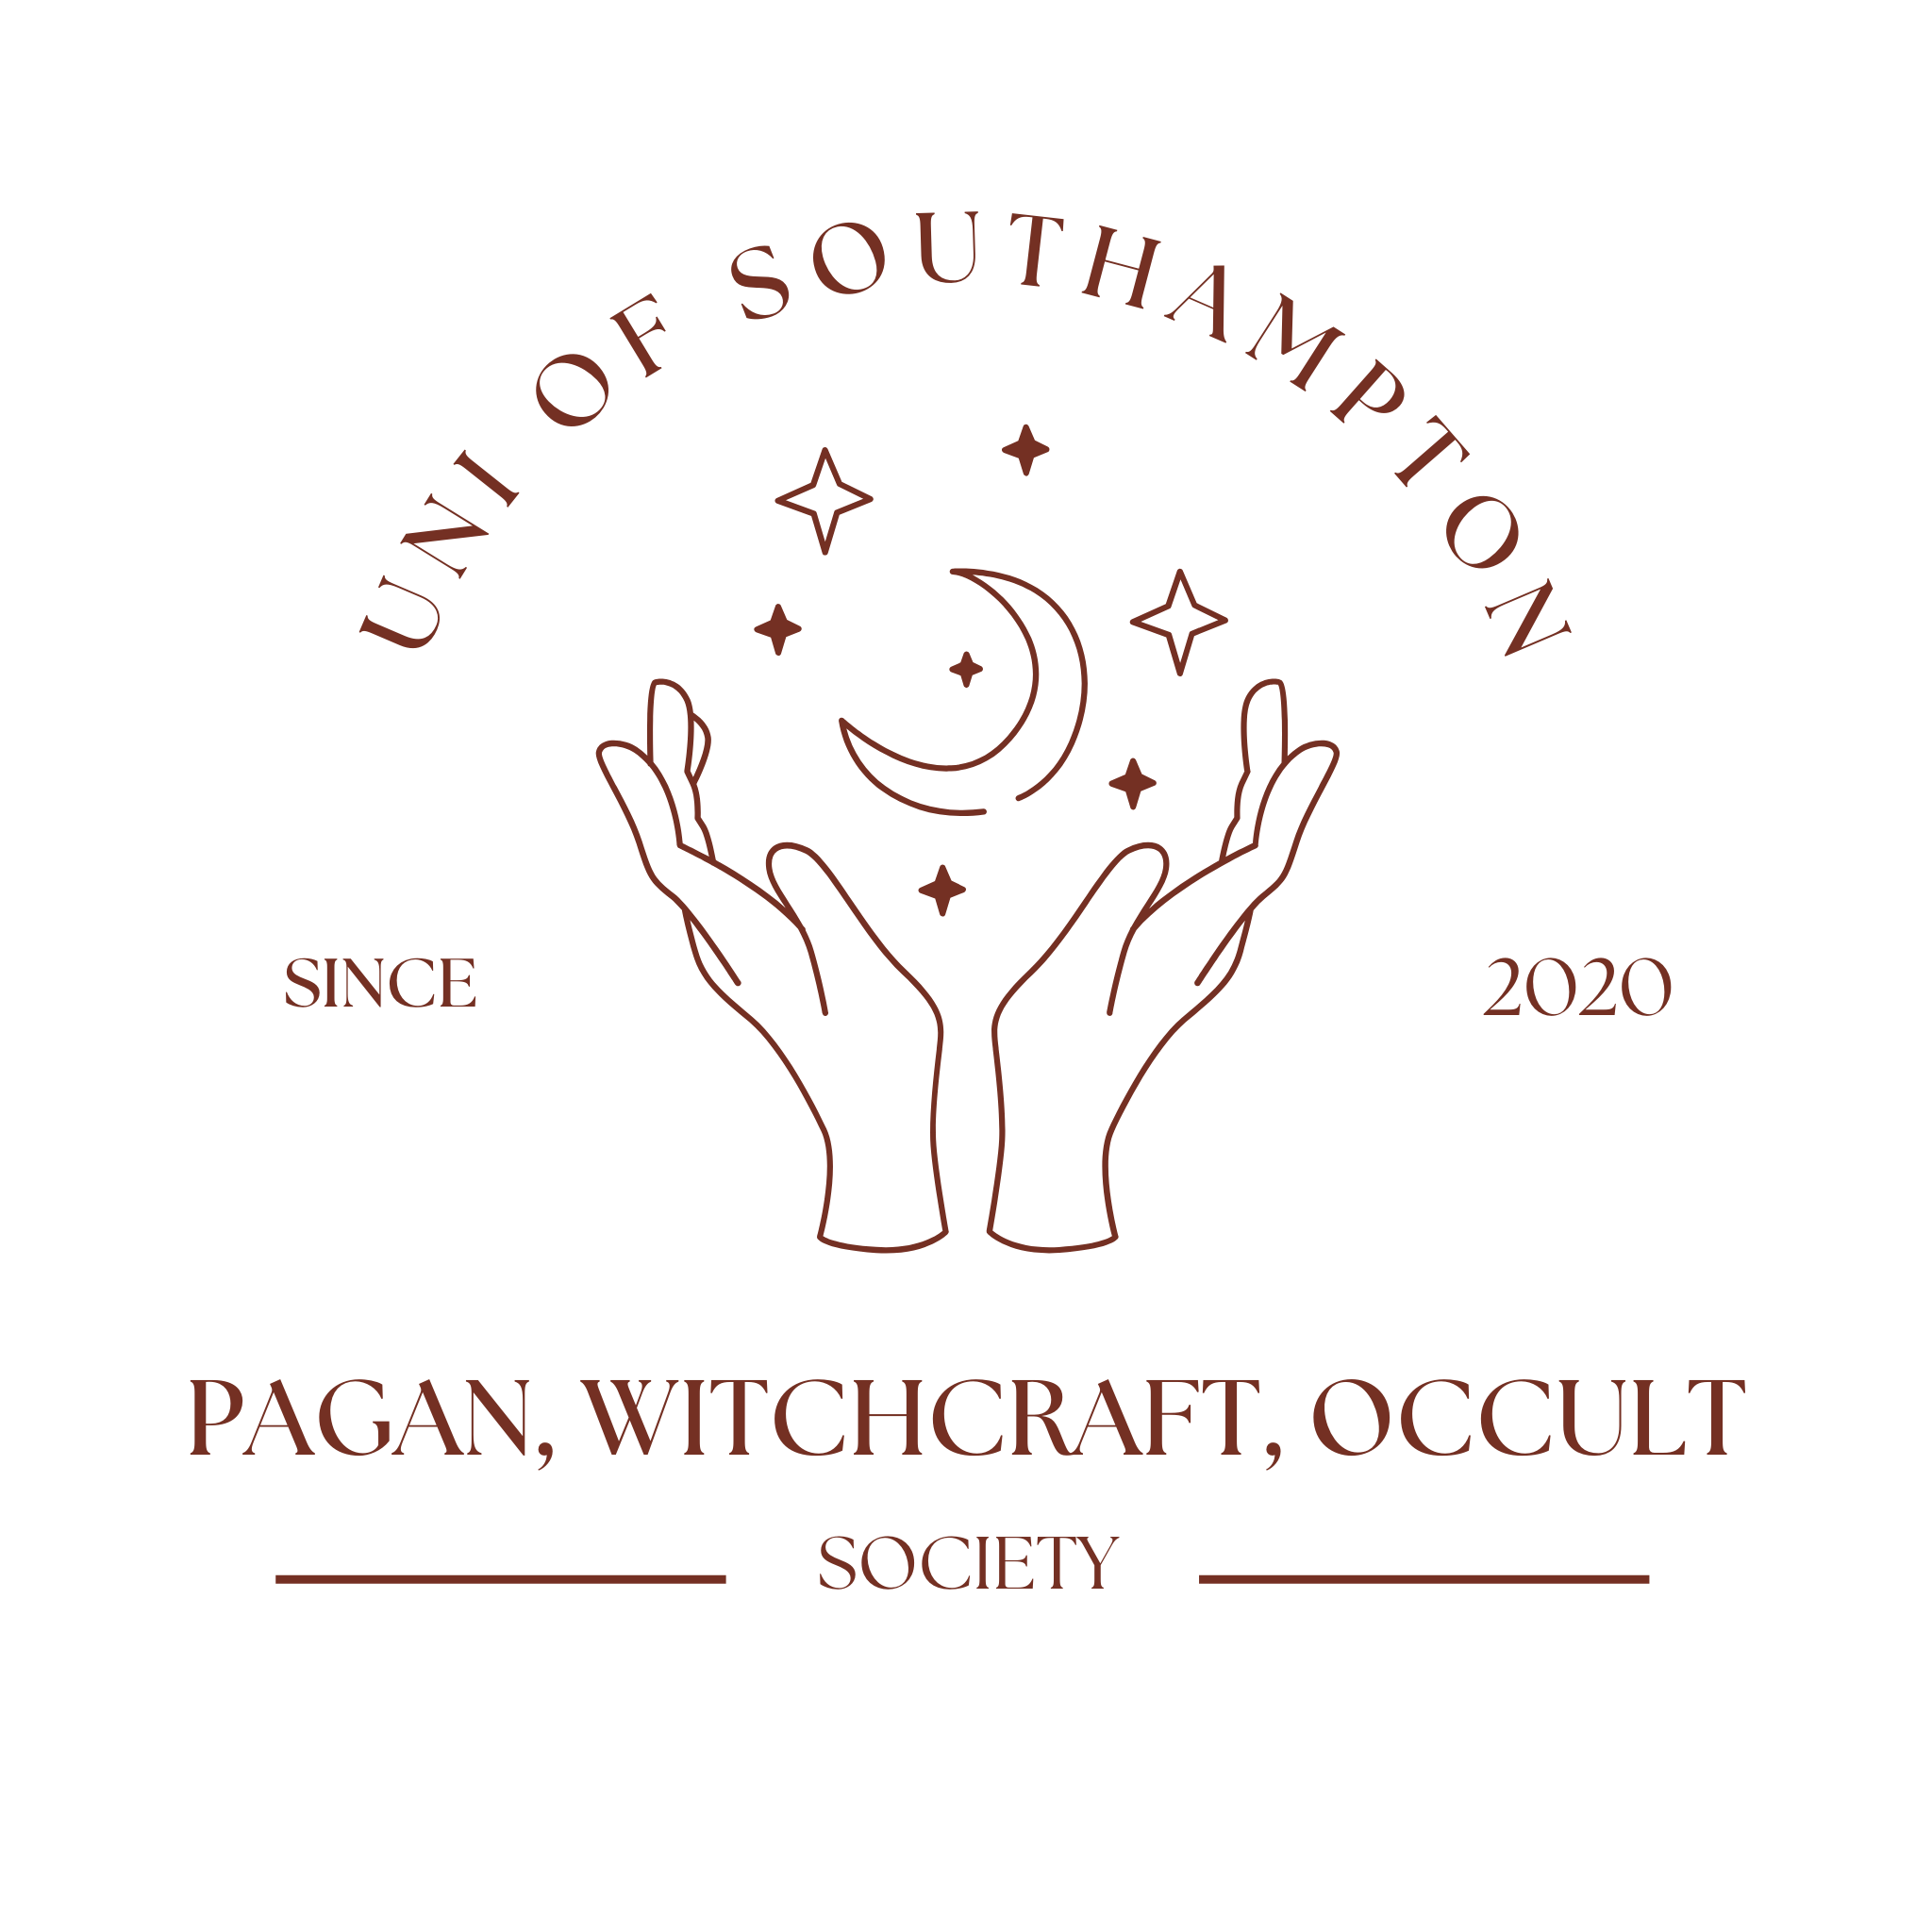 Pagan & Witchcraft Society